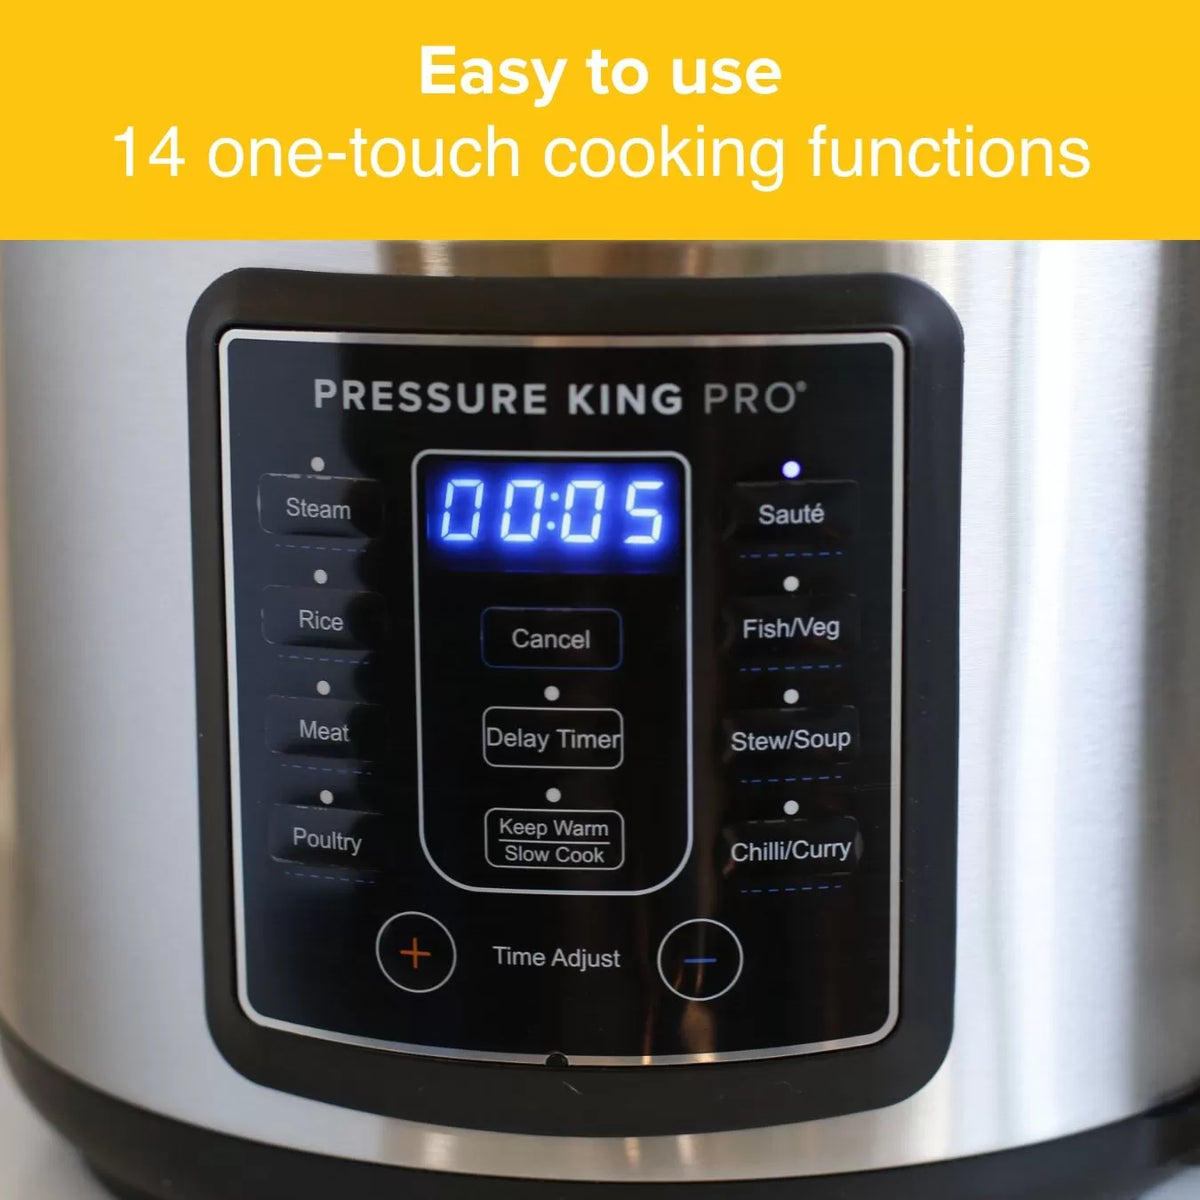 Pressure King Pro 4.8L 14-in-1 Pressure Cooker - Stainless Steel | 01731 (7594095050940)